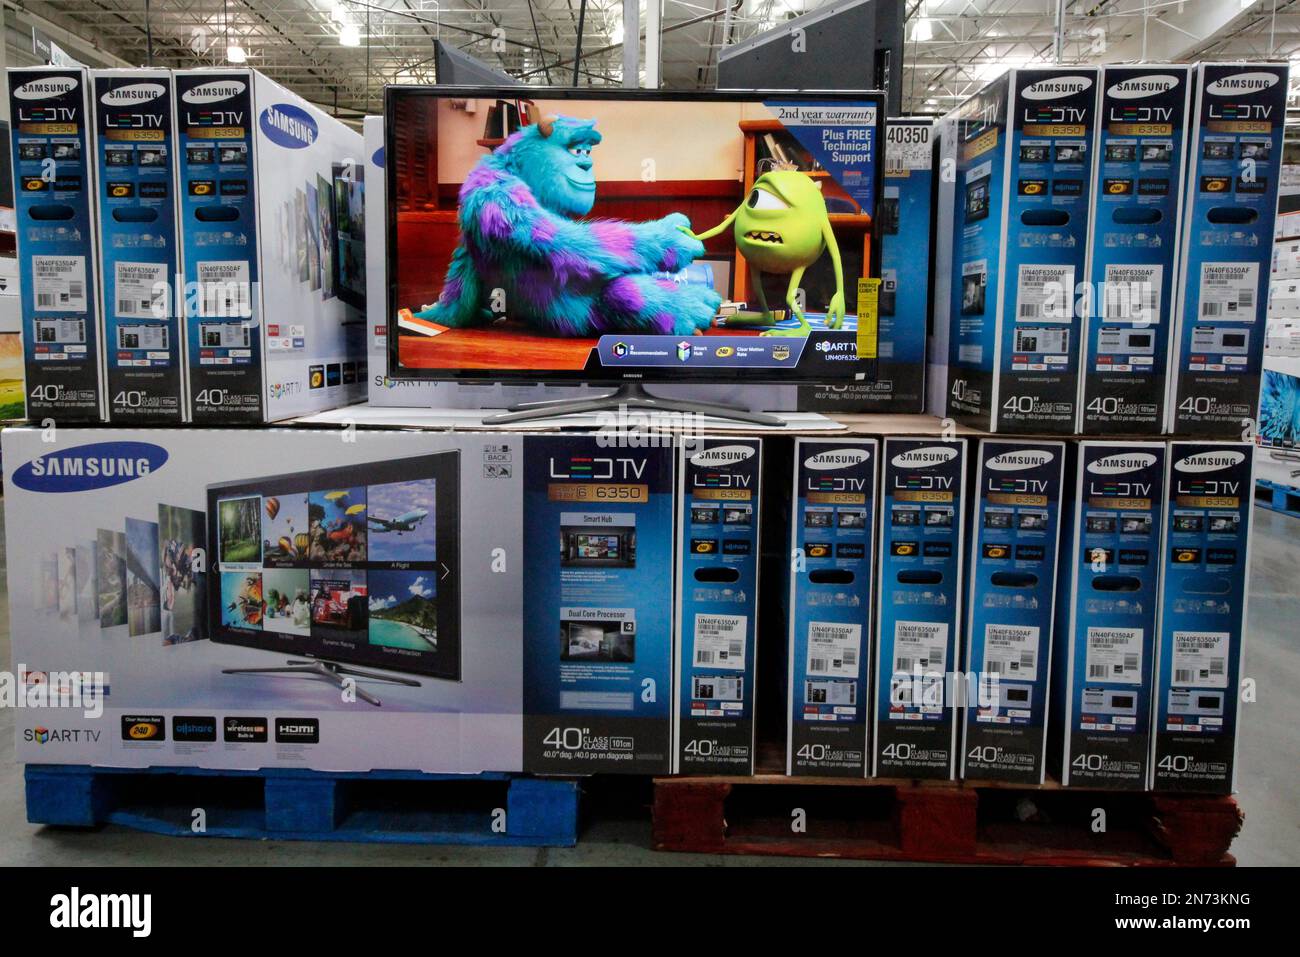 HOLD FOR BUSINESS PHOTO-- This is a Samsung 40 inch flat screen television  on display in a Costco in Pittsburgh, Tuesday, July 23, 2013. (AP  Photo/Gene J. Puskar Stock Photo - Alamy